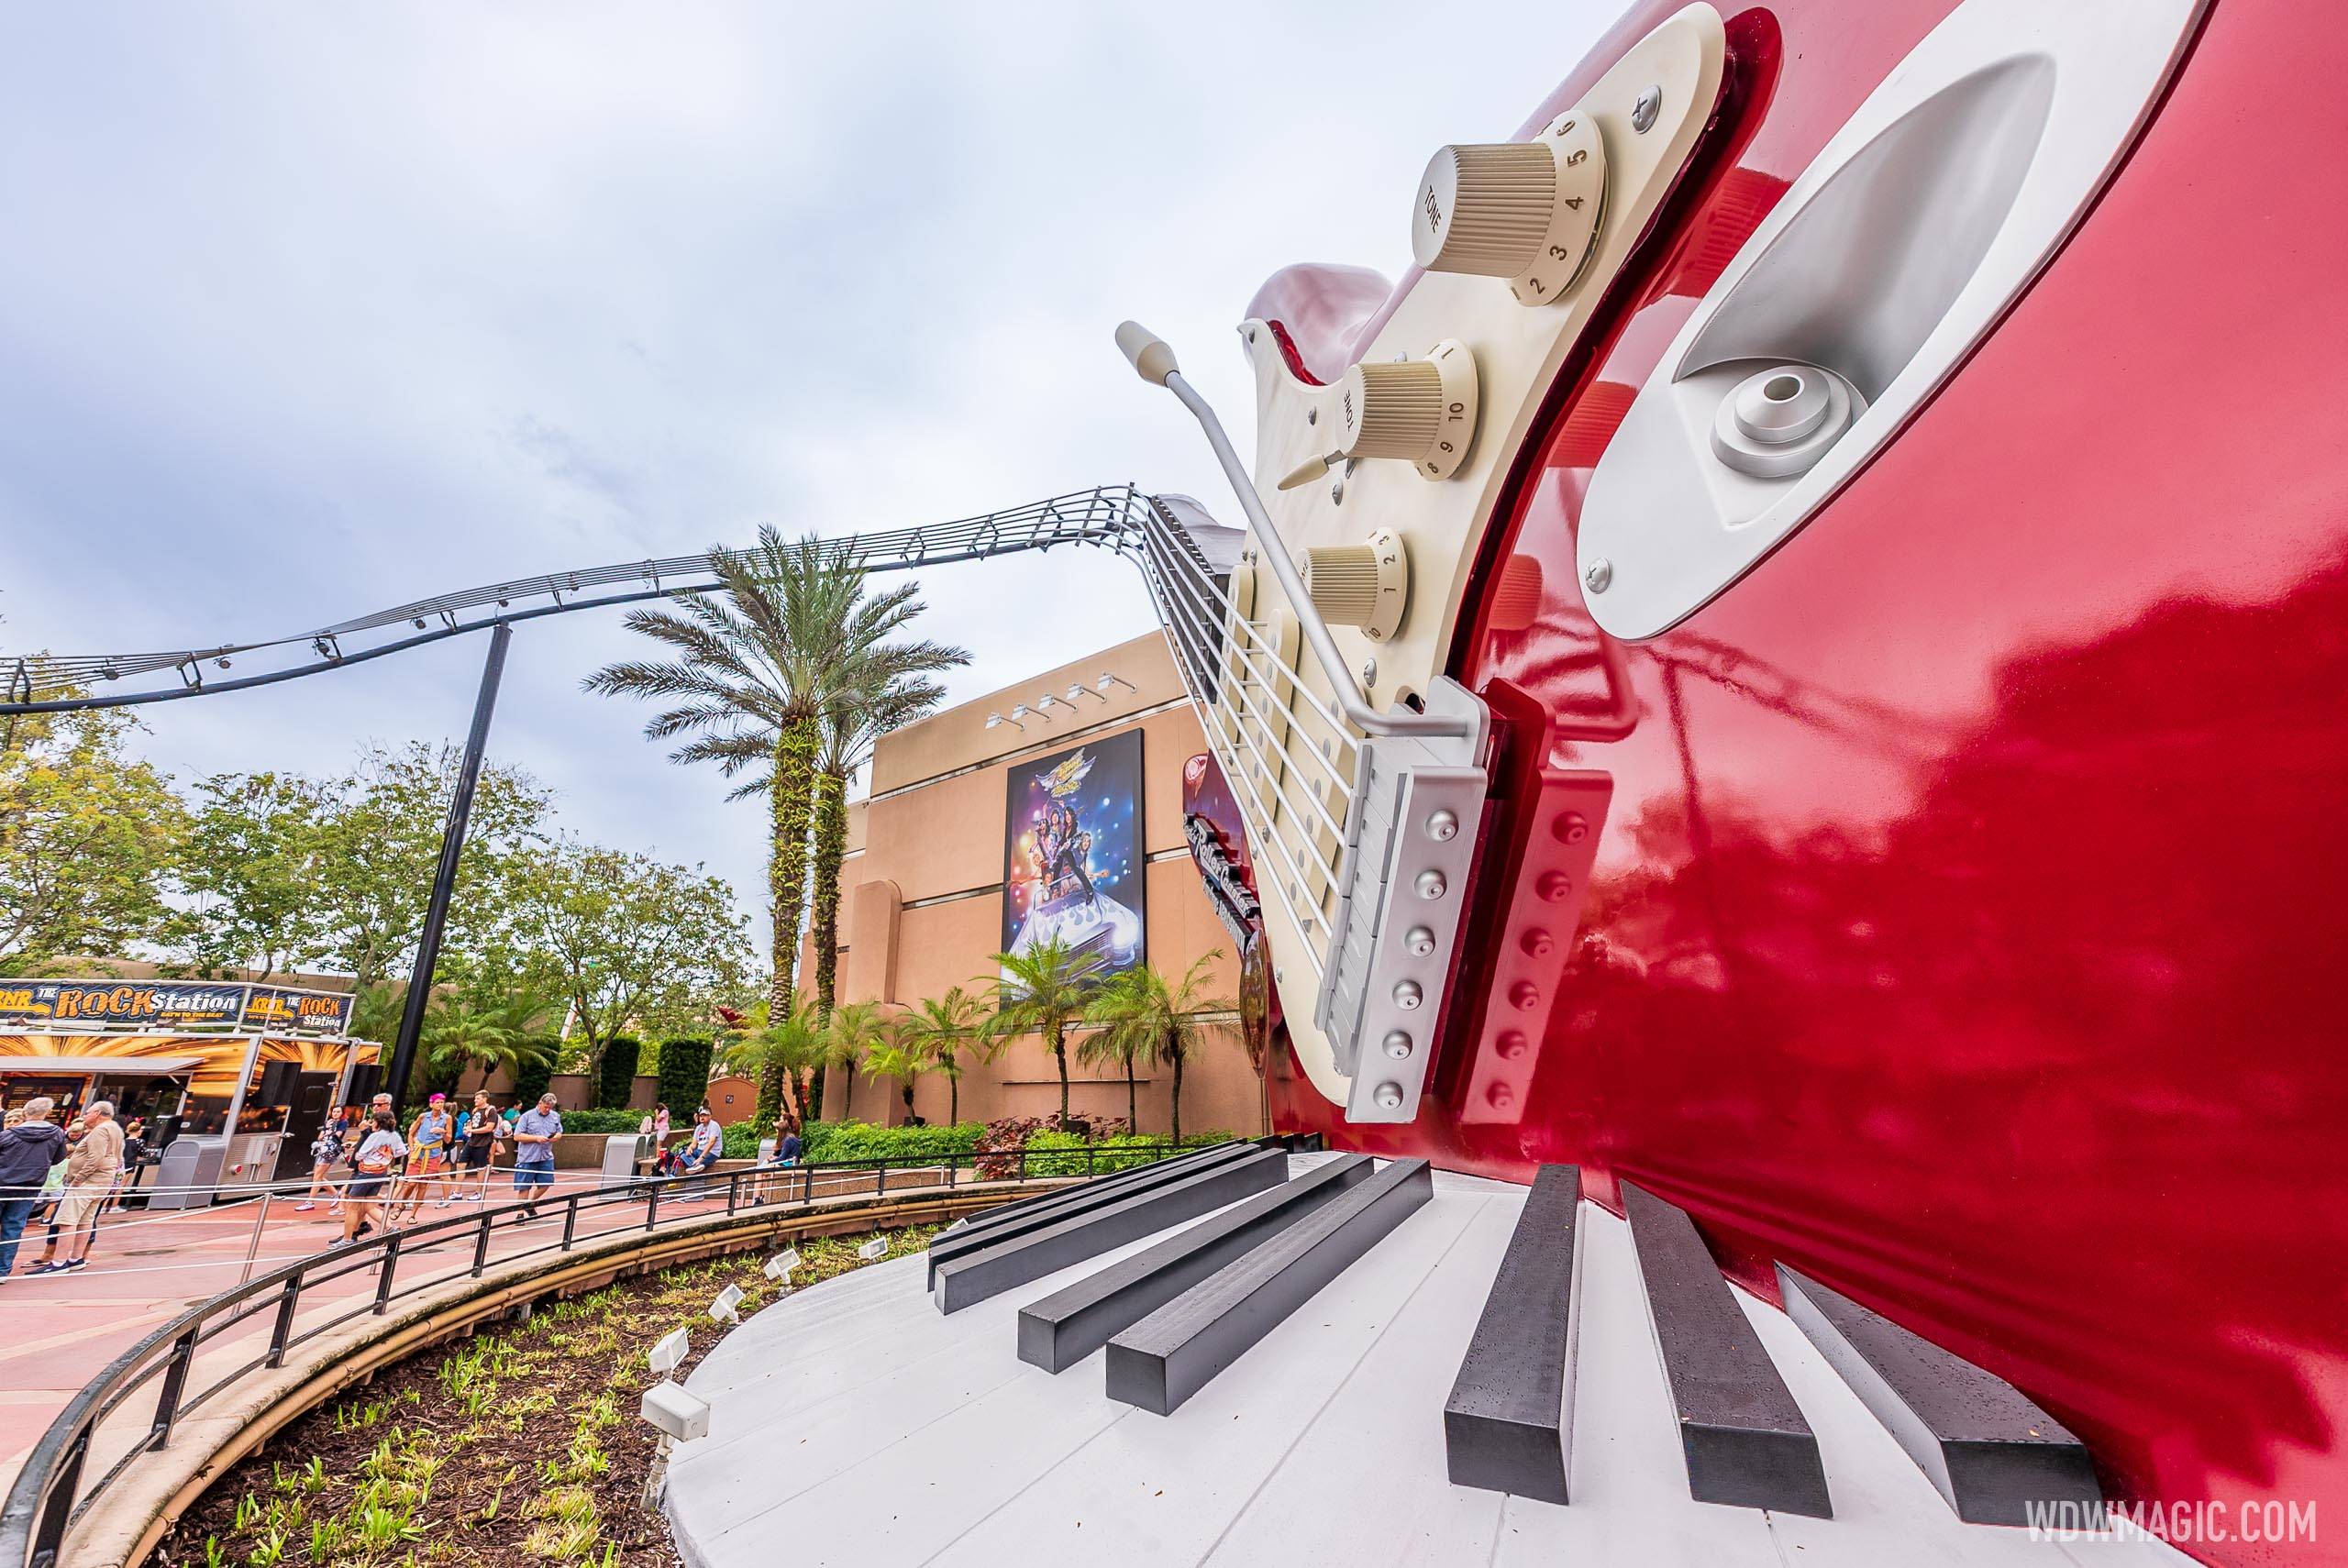 The ride also faced technical issues in the first week of January 2021